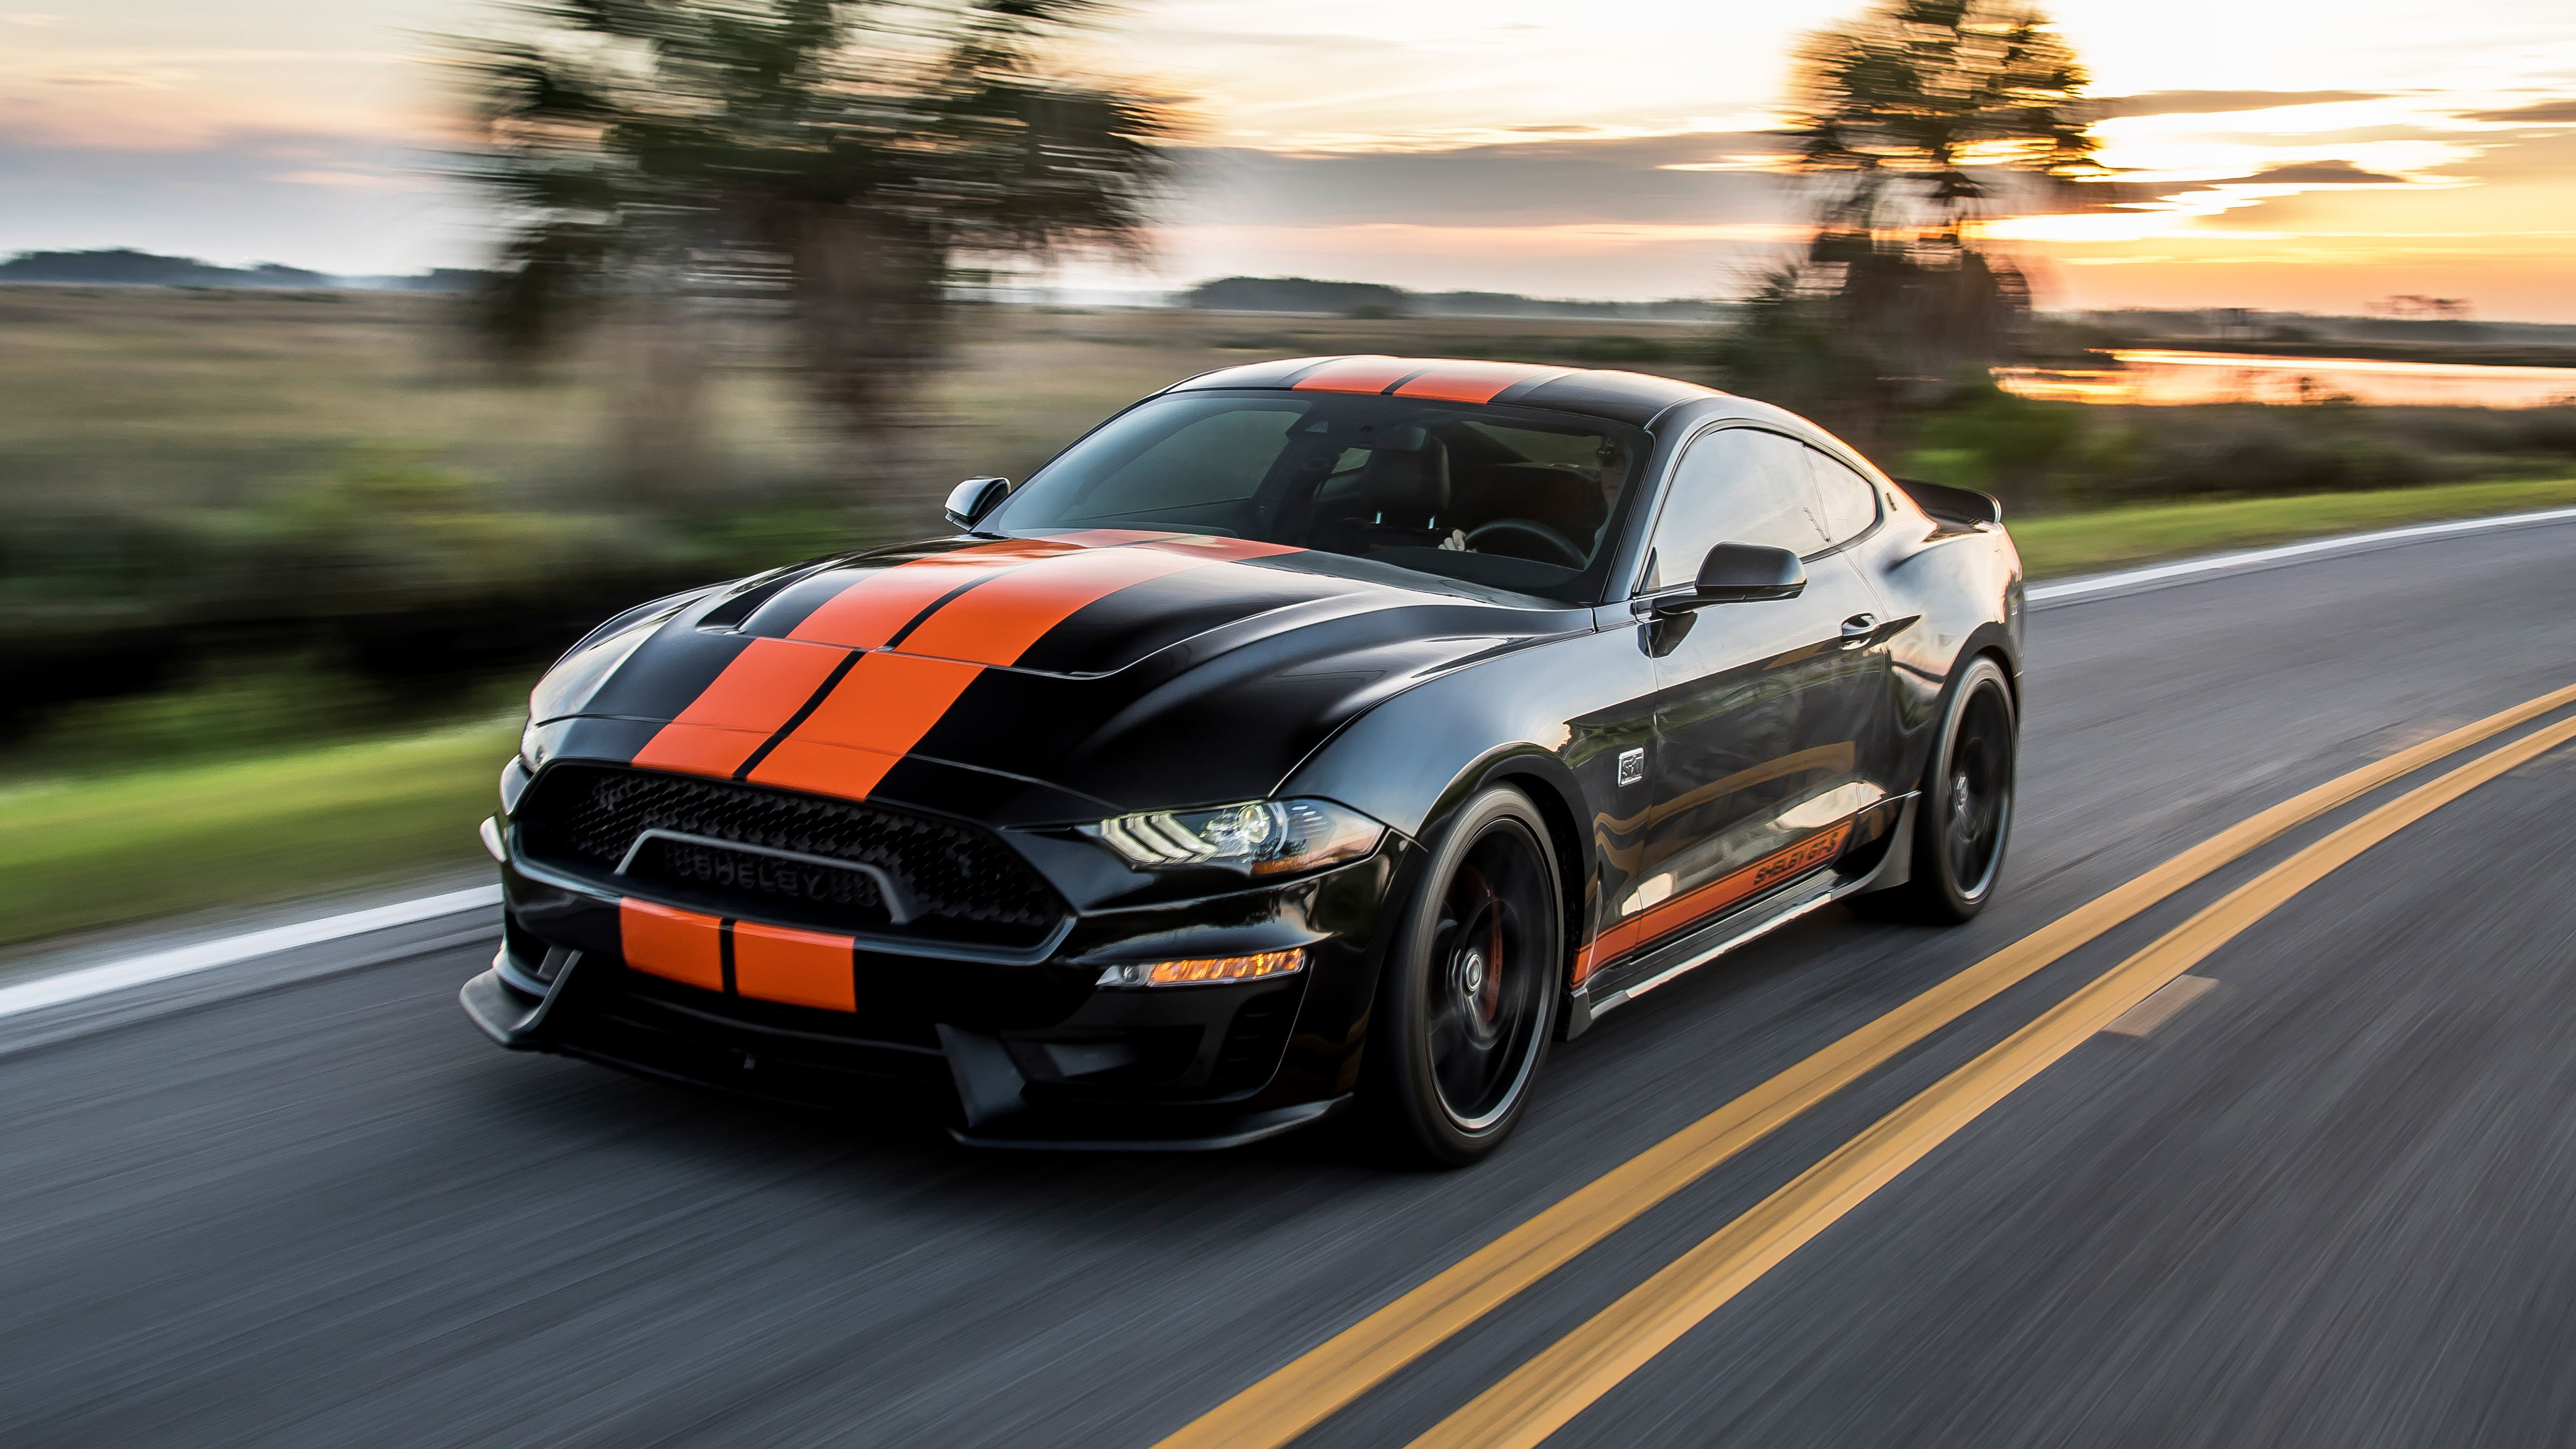 2019 Shelby Ford Mustang GT-S 4K Wallpaper | HD Car ...